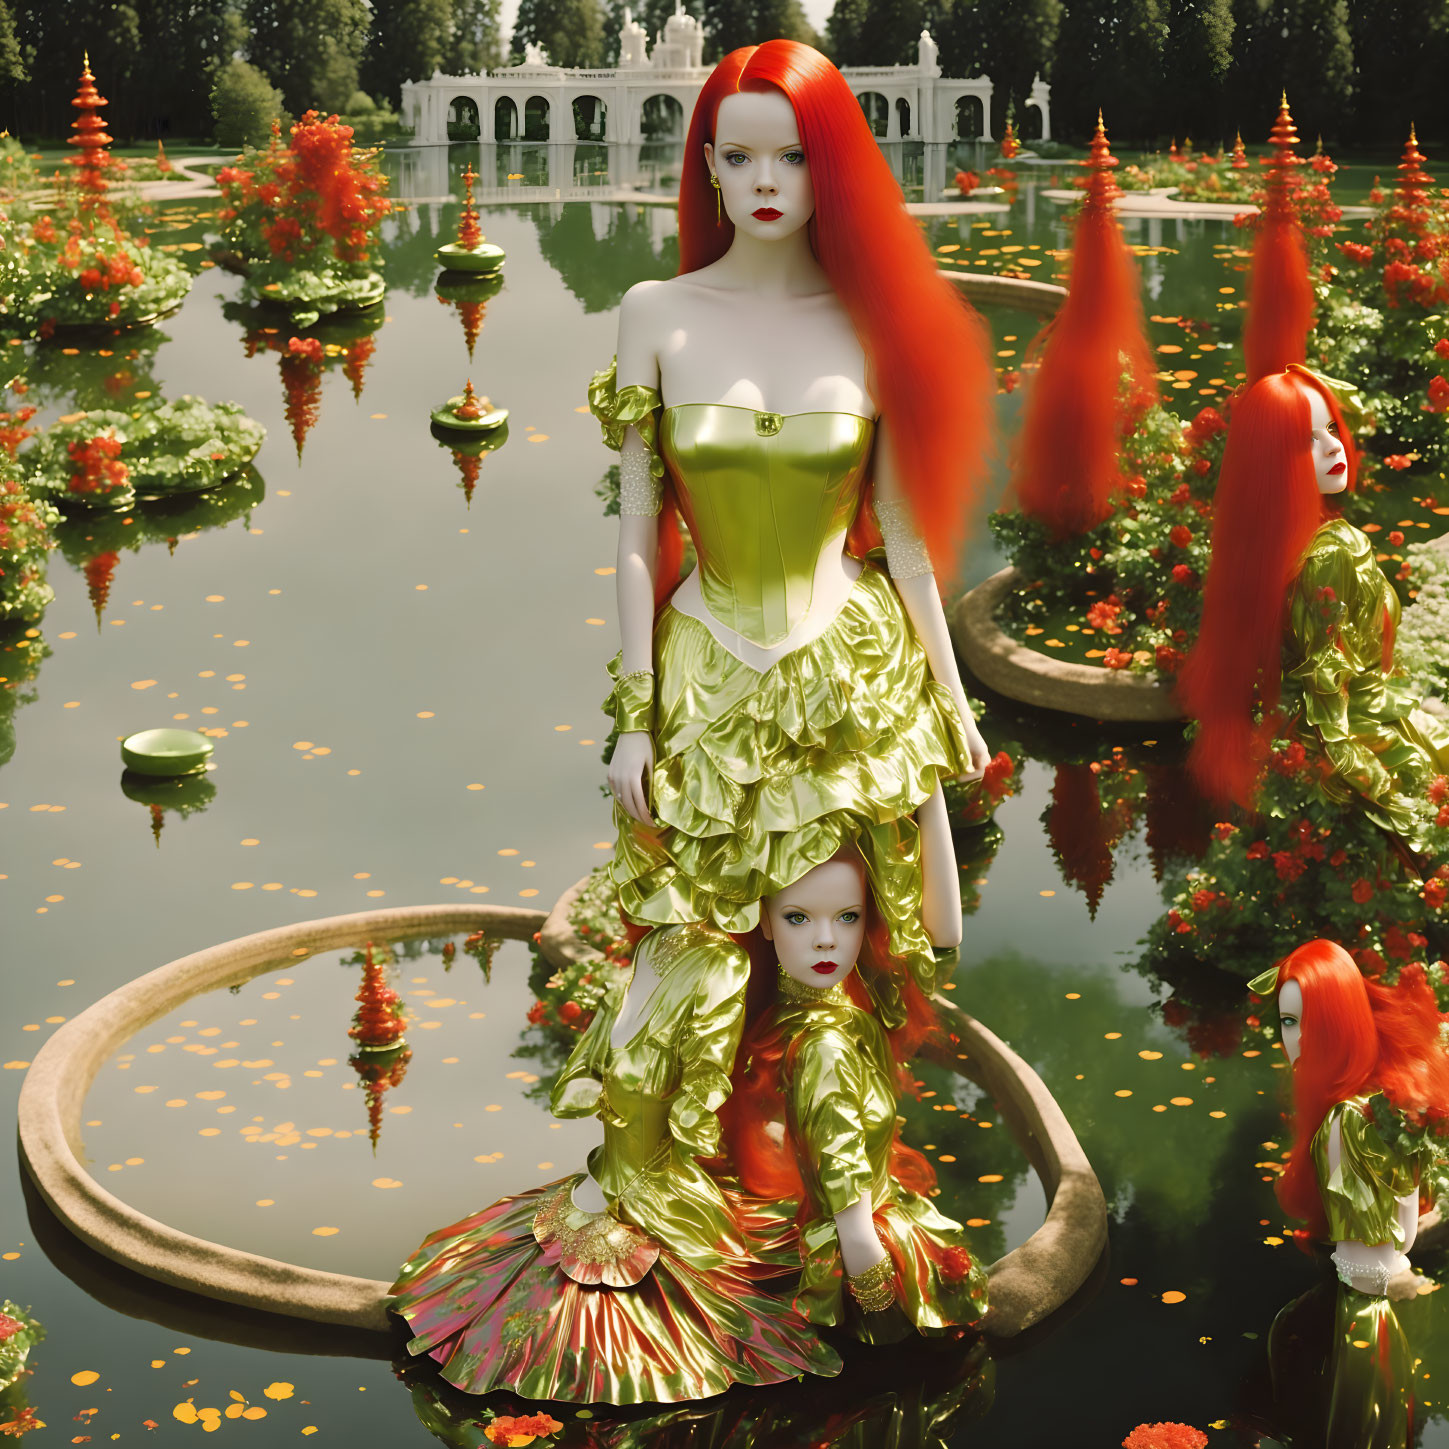 Red-haired female mannequin in green dress surrounded by blurred duplicates in lush garden with fountains and